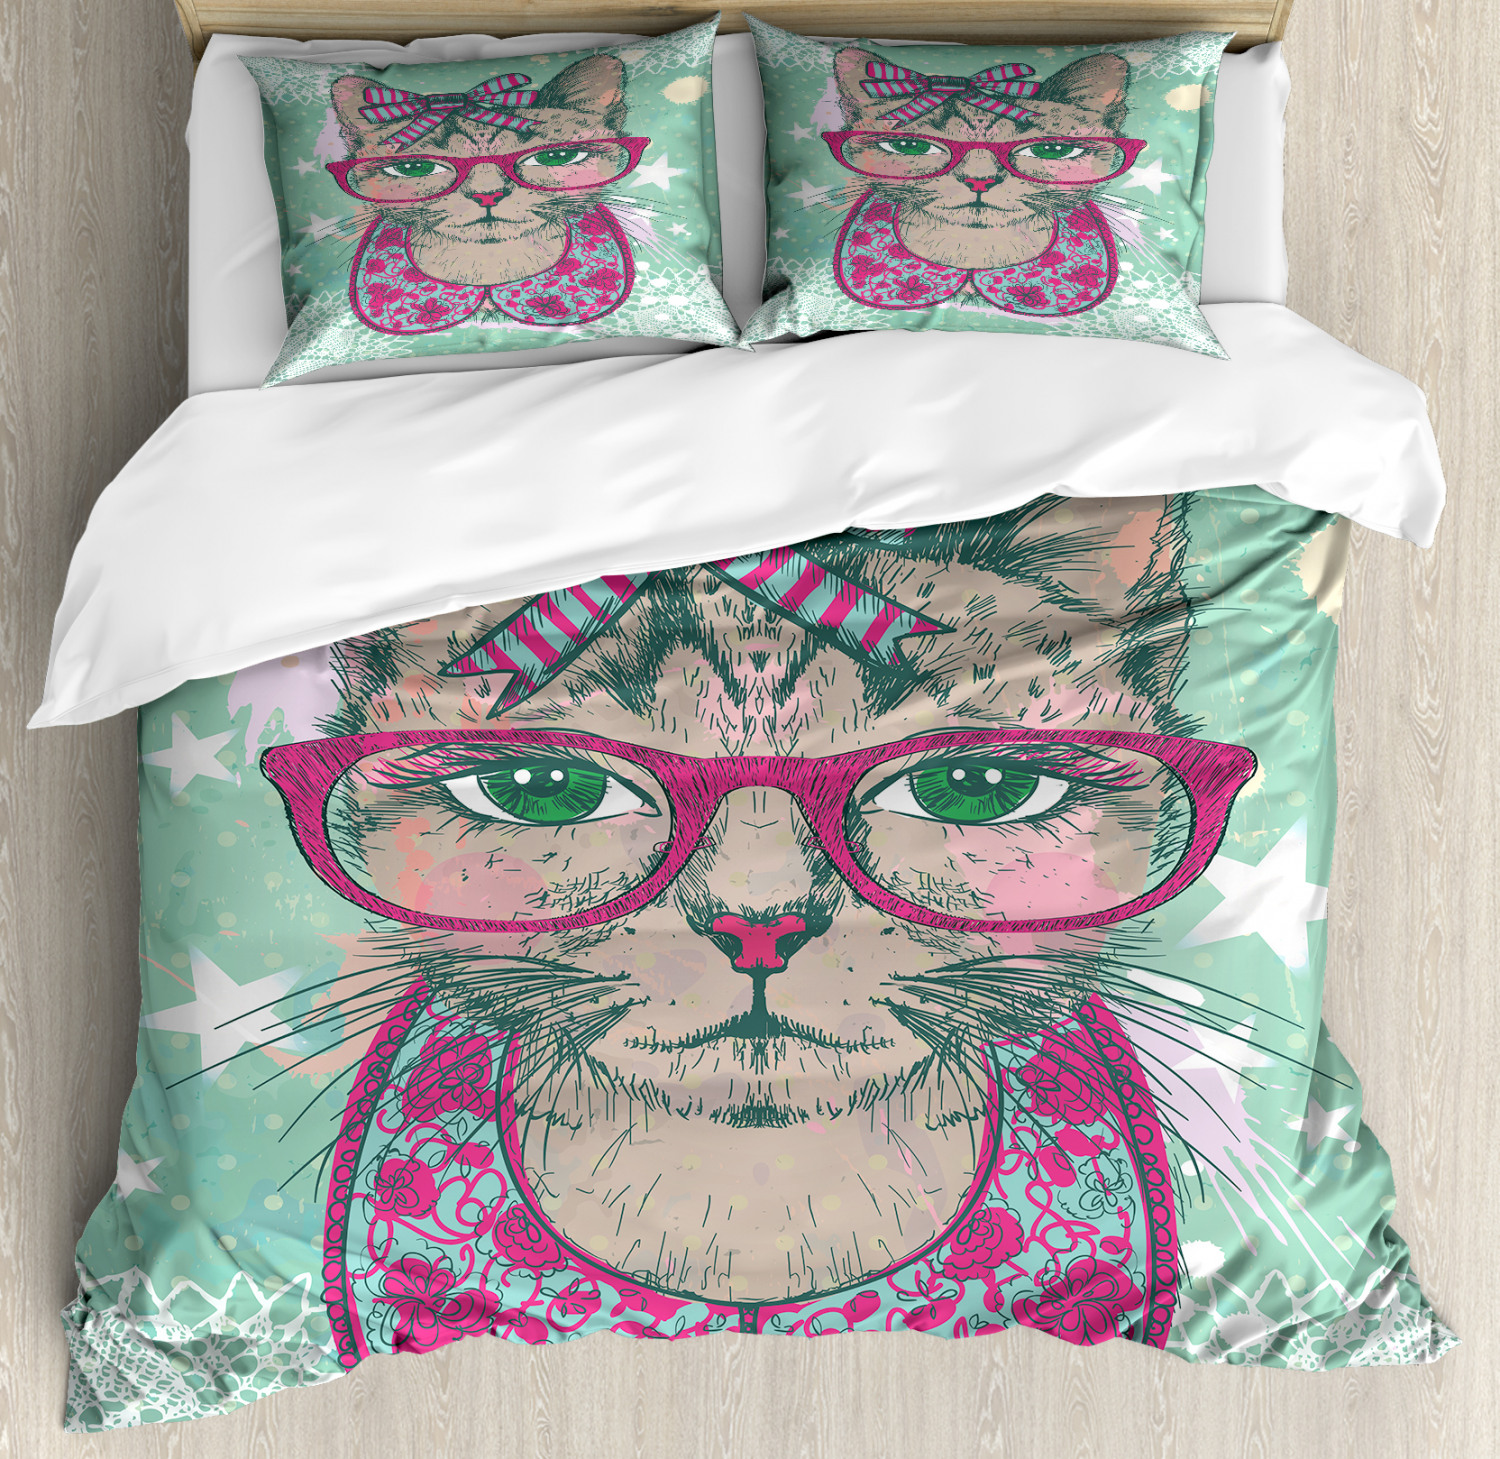 Cat Duvet Cover Set With Pillow Shams Animal Fashion Hipster Print